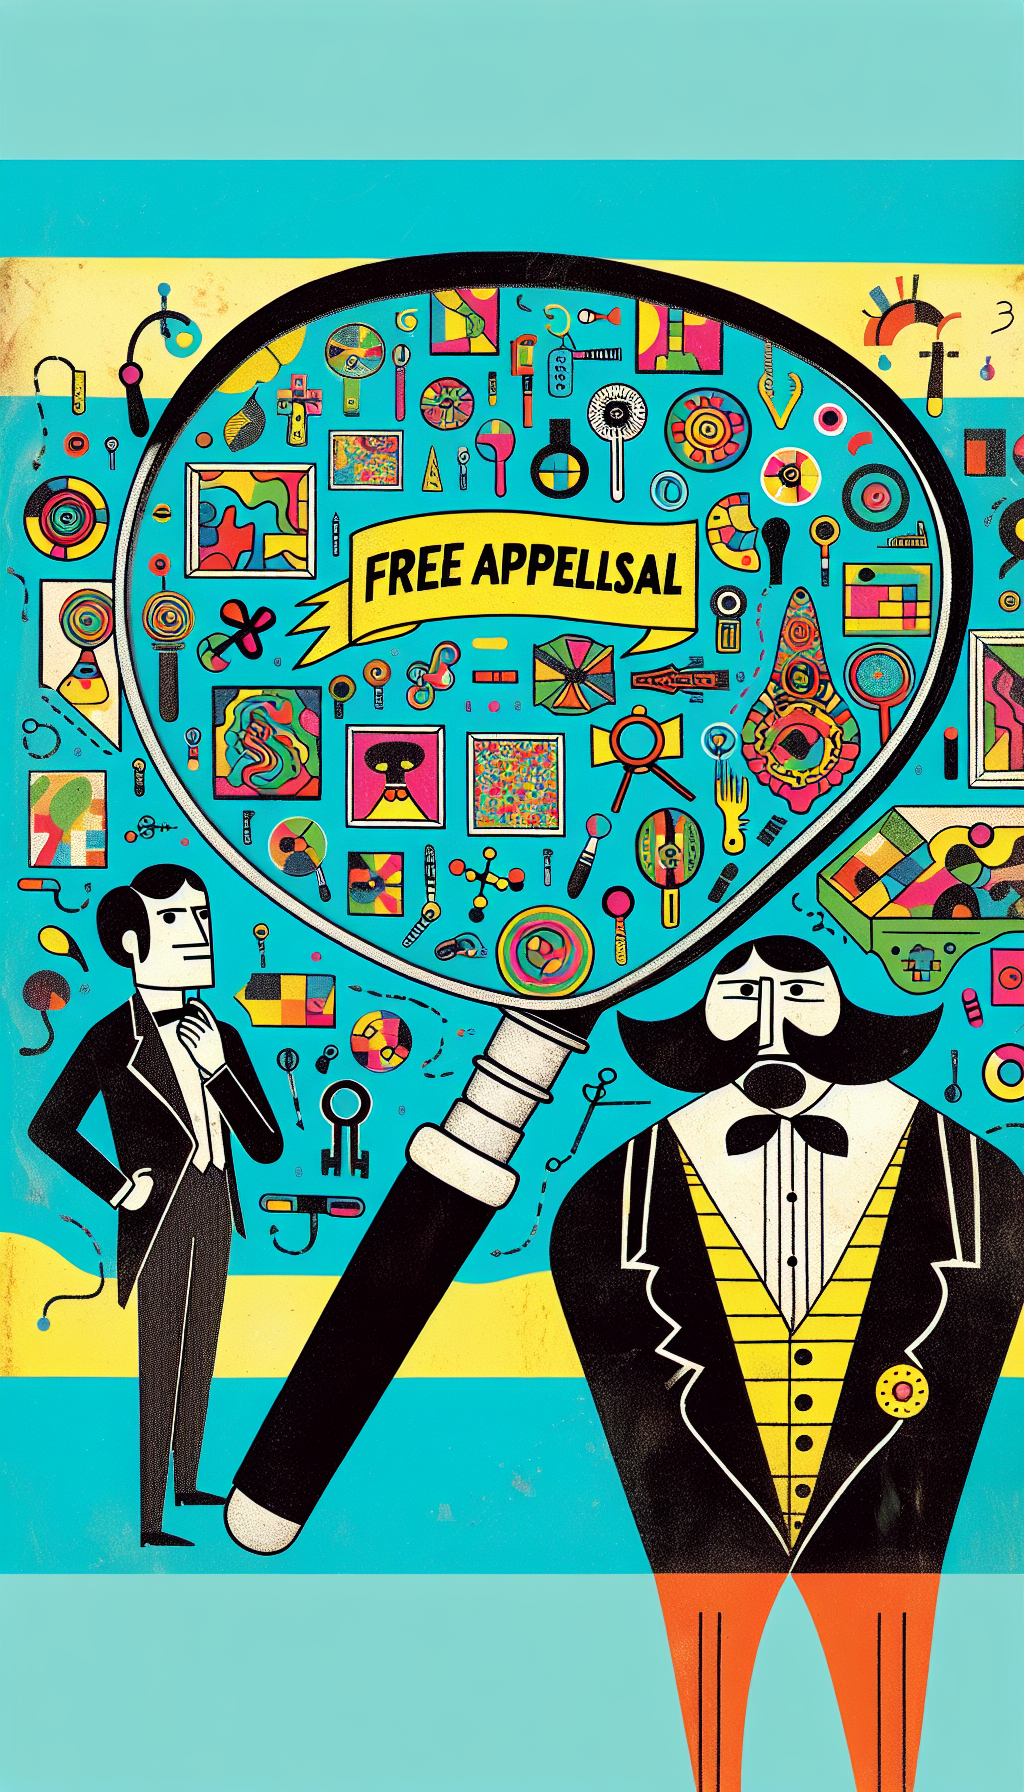 A whimsical collage-style illustration of a magnifying glass peering over a colorful map dotted with abstract art symbols, pinpointing locations with a "Free Appraisal" banner waving. A side caricature of an art appraiser examines a painting with a thoughtful expression, hinting at the analytical process behind valuations.